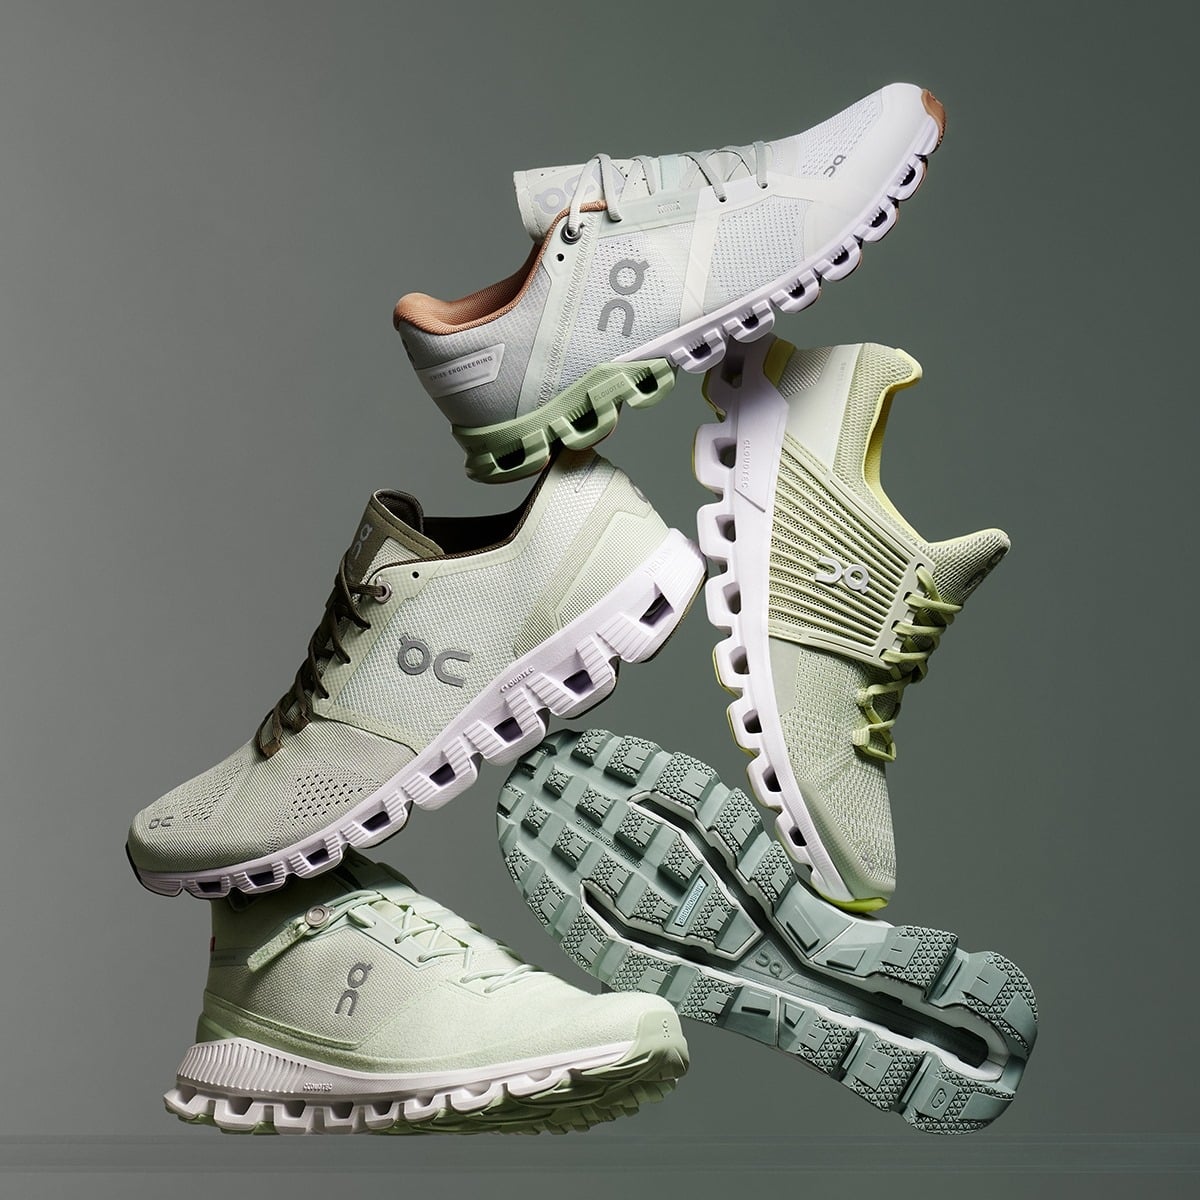 Are On Cloud Shoes True To Size - Best Design Idea